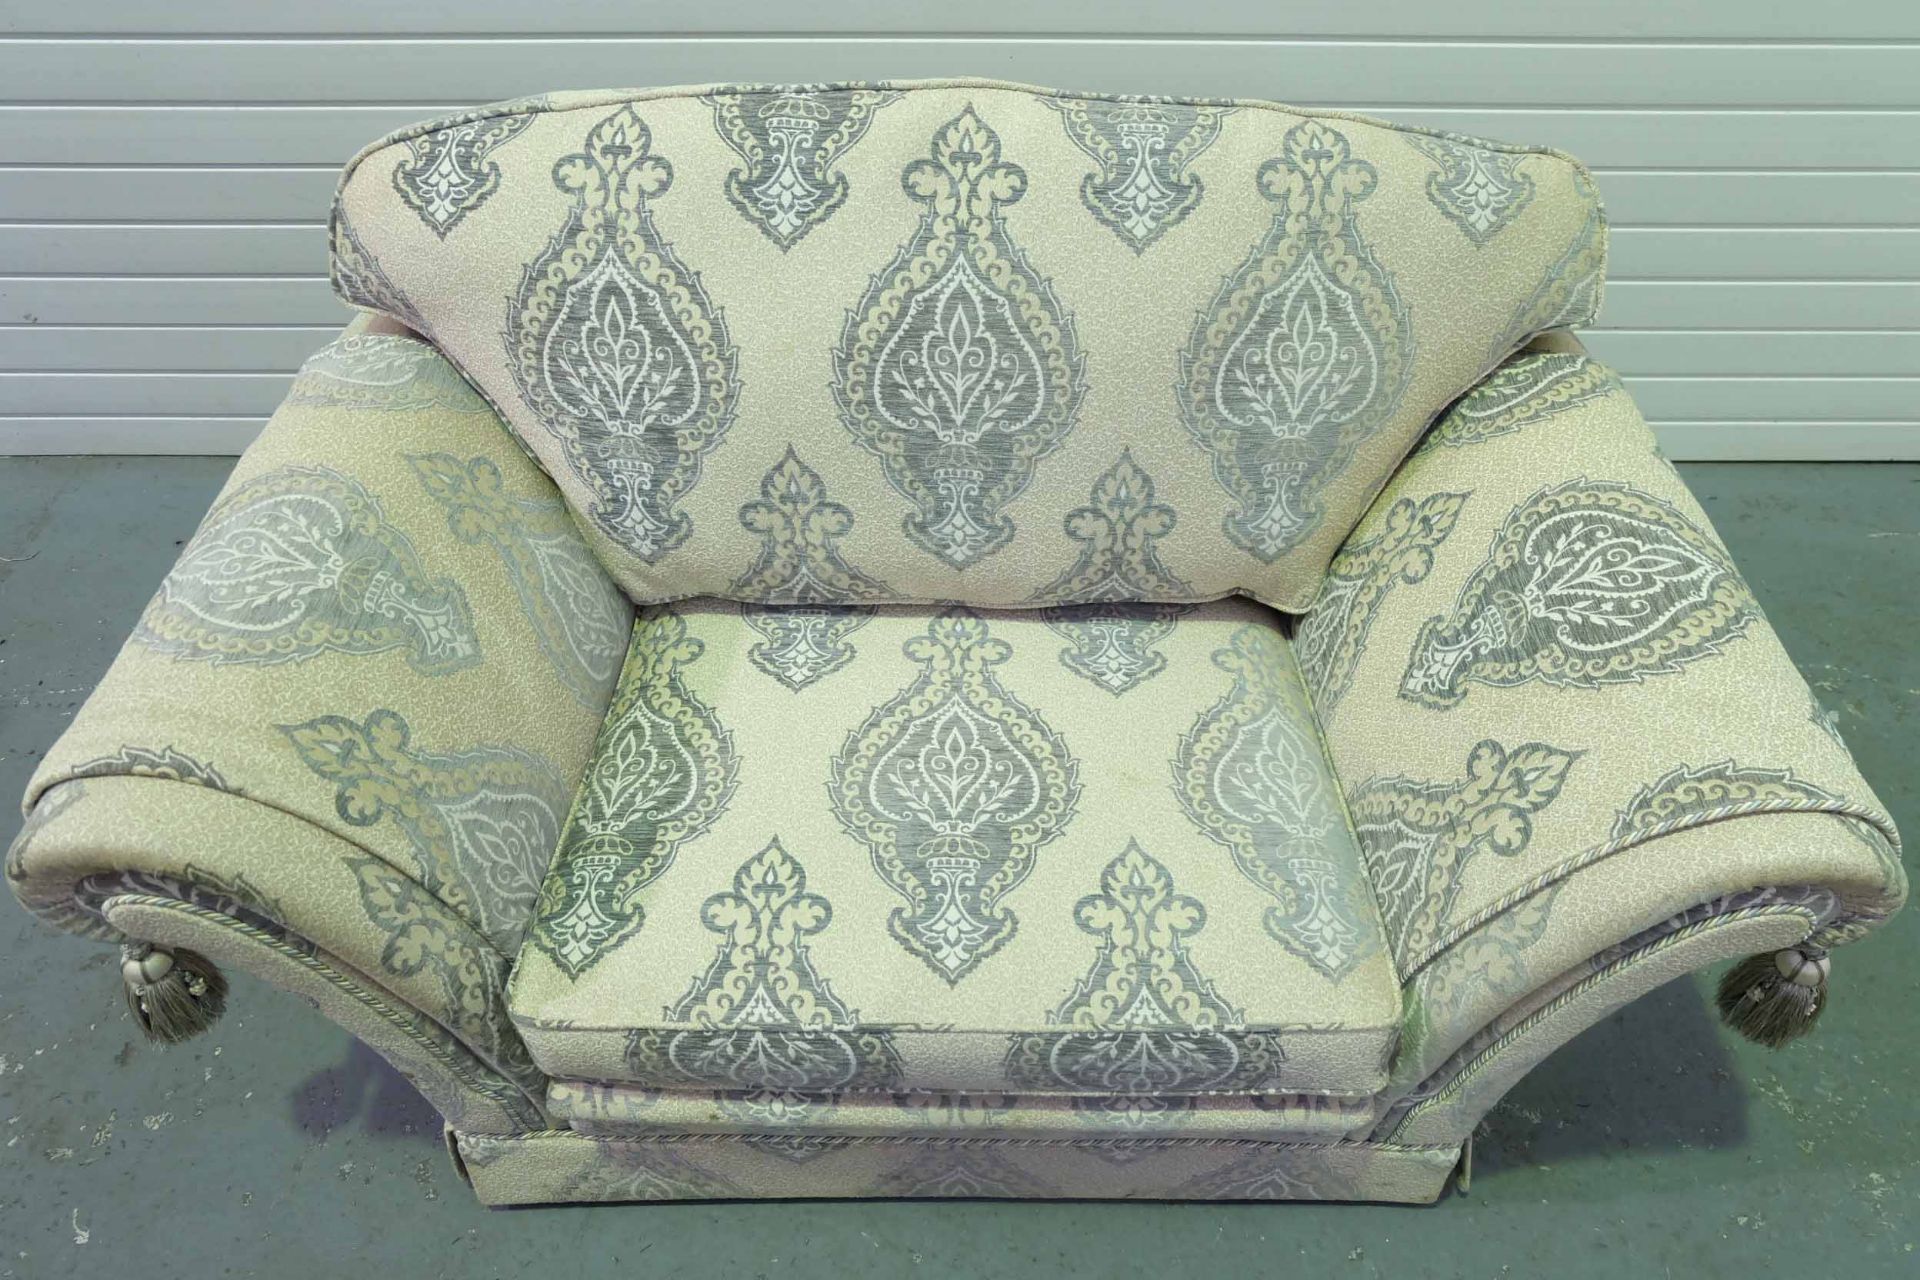 Steed Upholstery 'Kedleston' Range Fully Handmade Large 1.5 Seater Chair. With Valance & Arm Throws. - Image 4 of 4